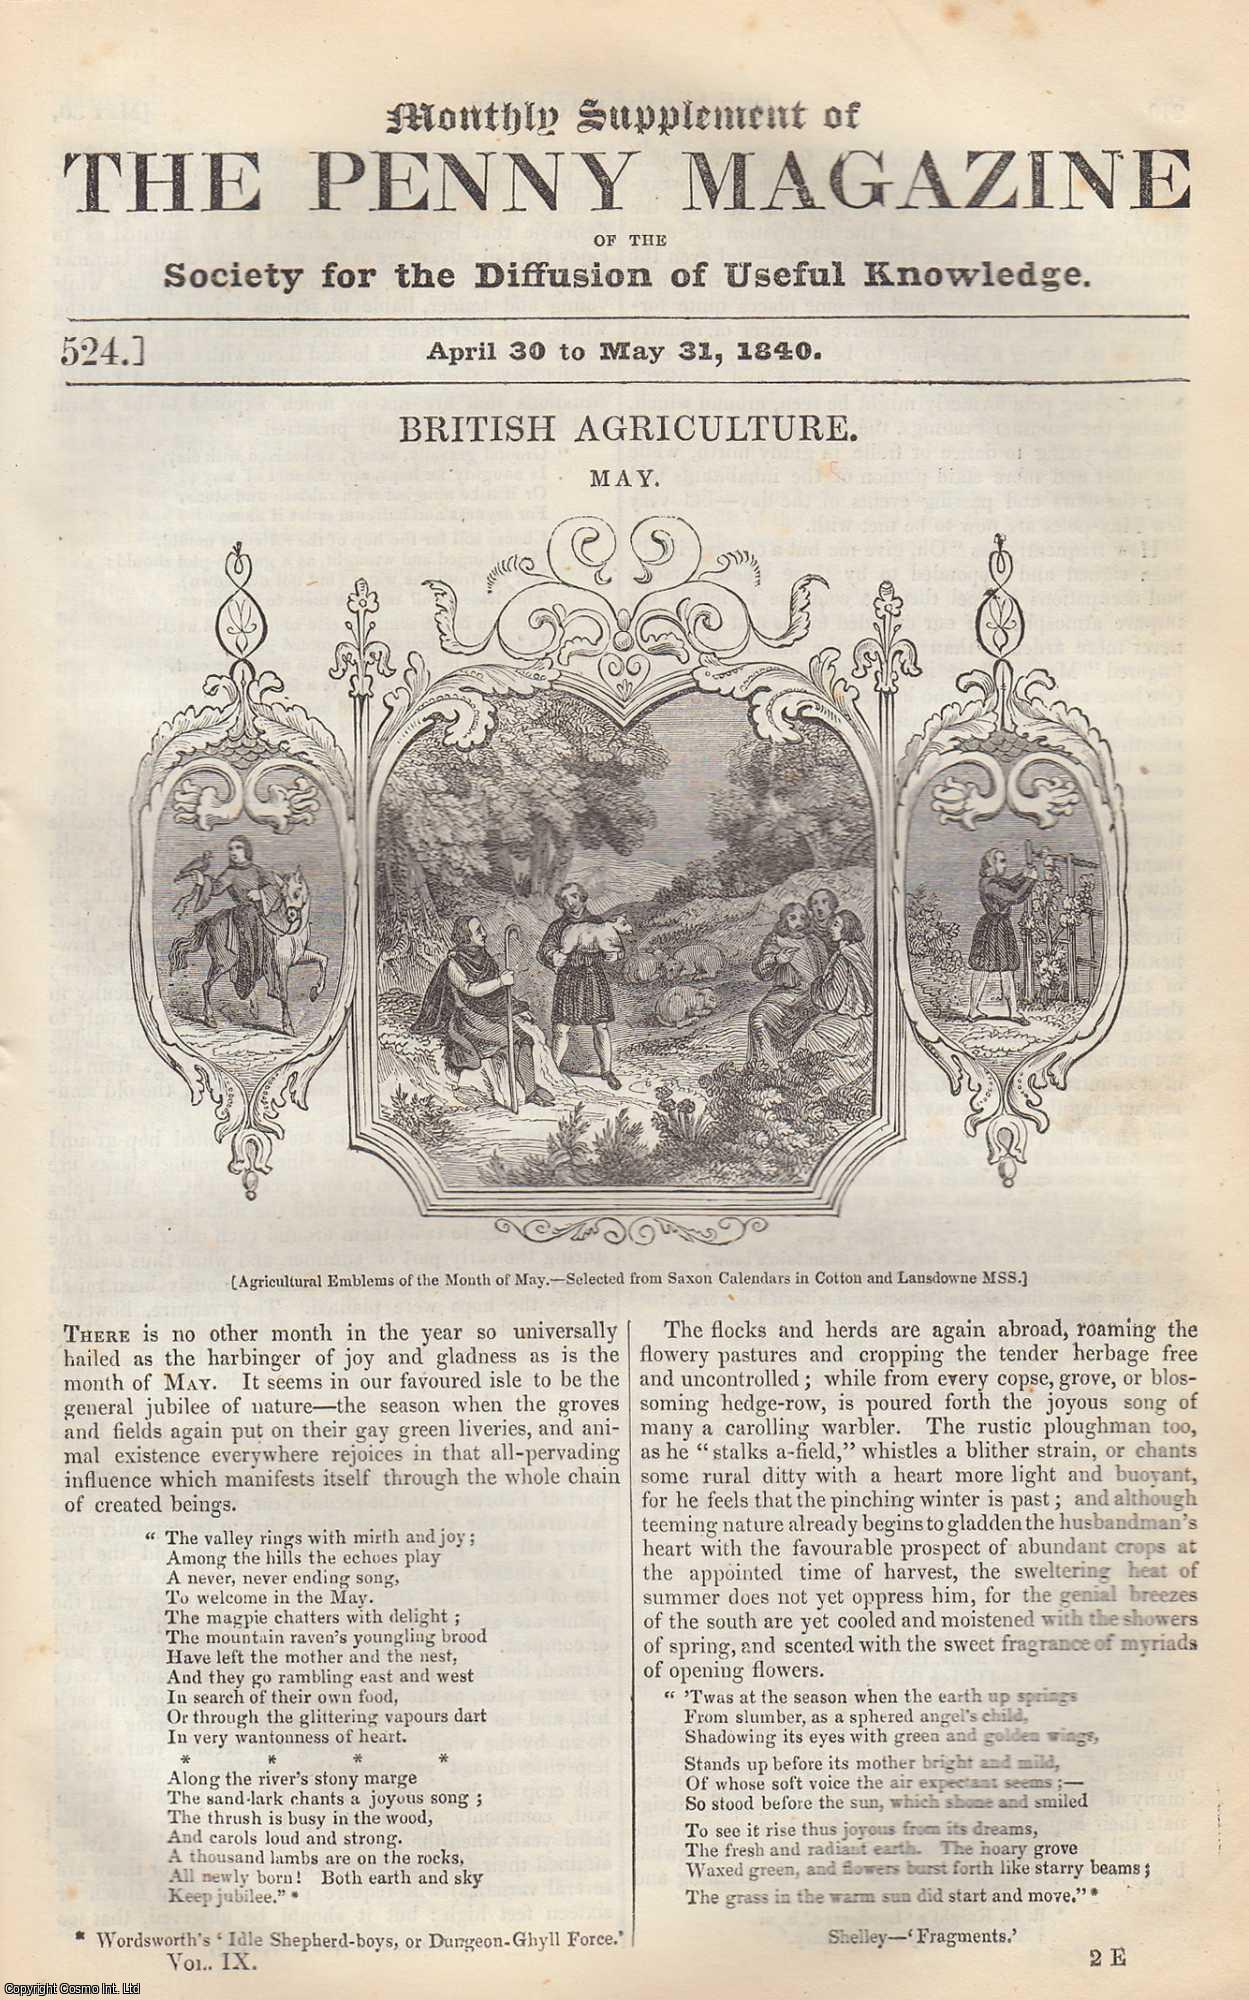 --- - British Agriculture (May). Issue No. 524, April 30th, 1840. A complete rare weekly issue of the Penny Magazine, 1840.